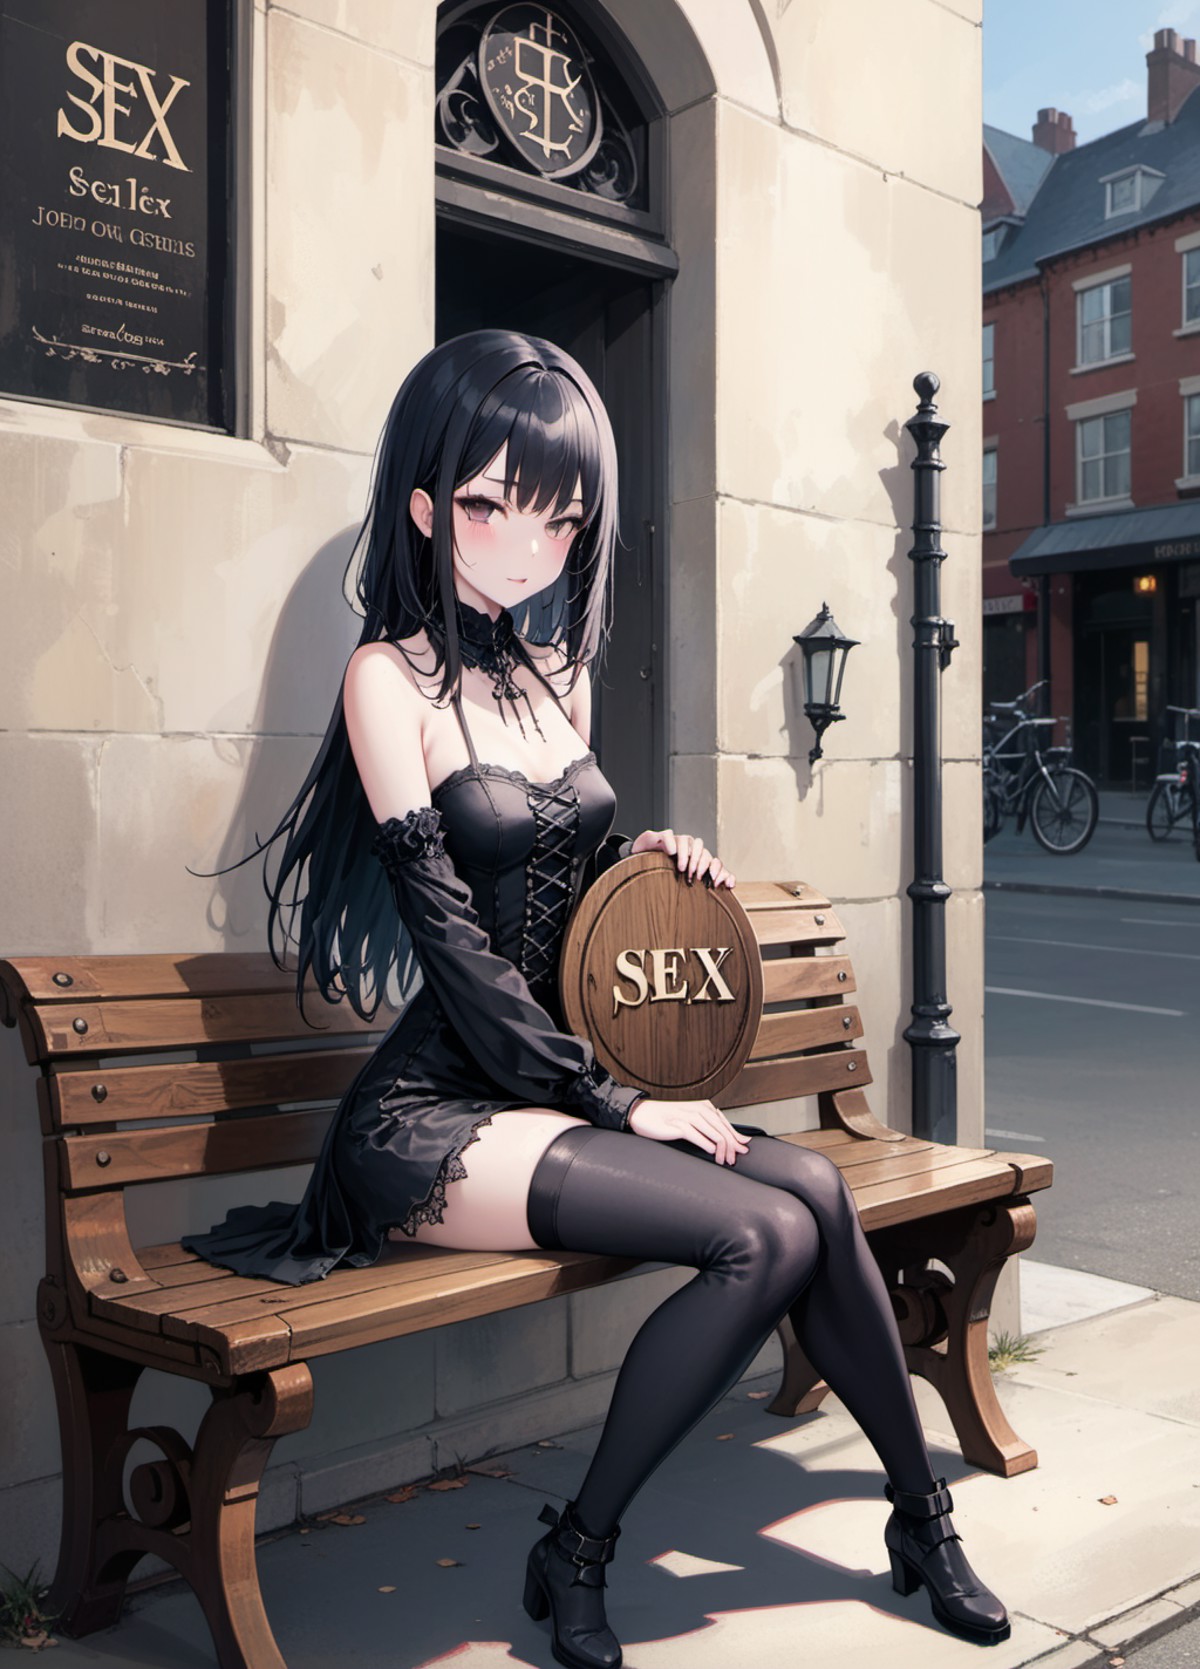 A girl dressed in black Gothic attire,Sitting on a bench by the street,Holding a large wooden plaque with SEX written on it,